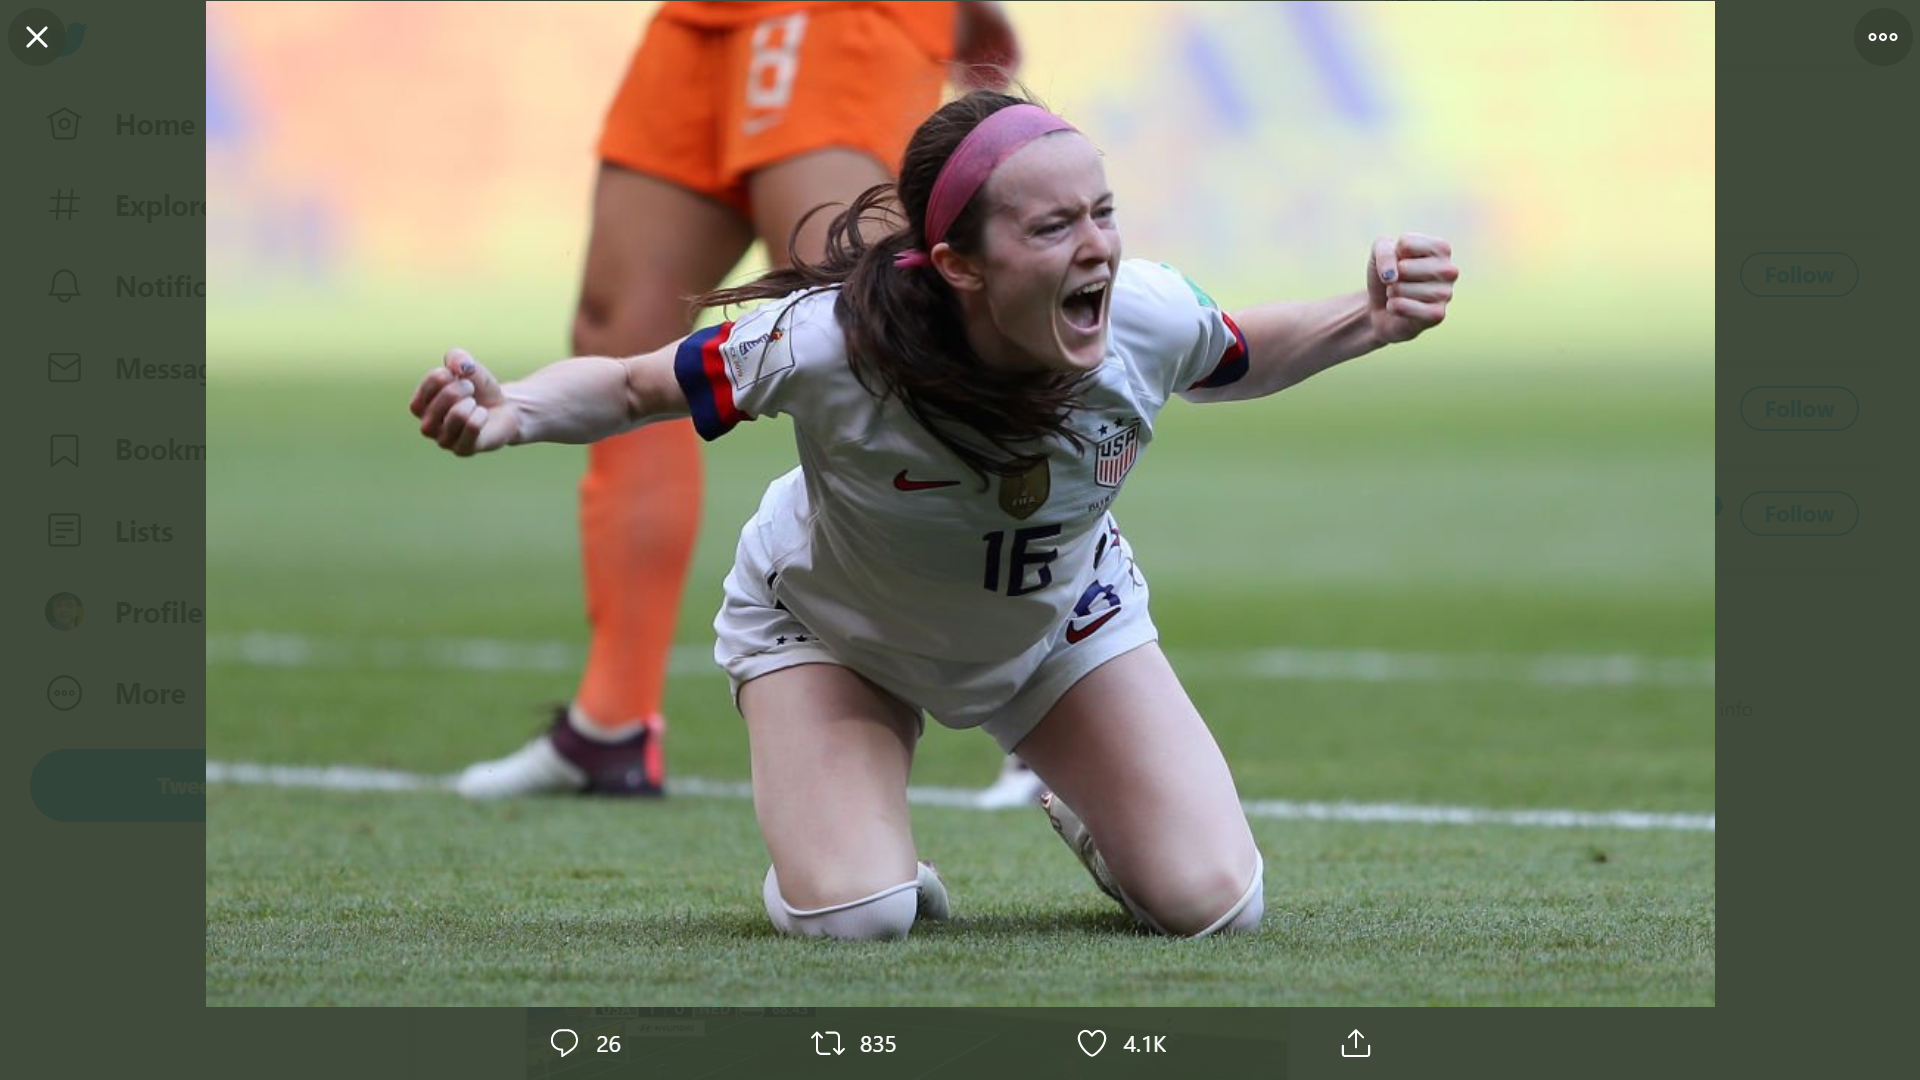 Twitter Viral Tweets - Rose Lavelle’s goal in world cup final (2019) tweeted on Twitter.